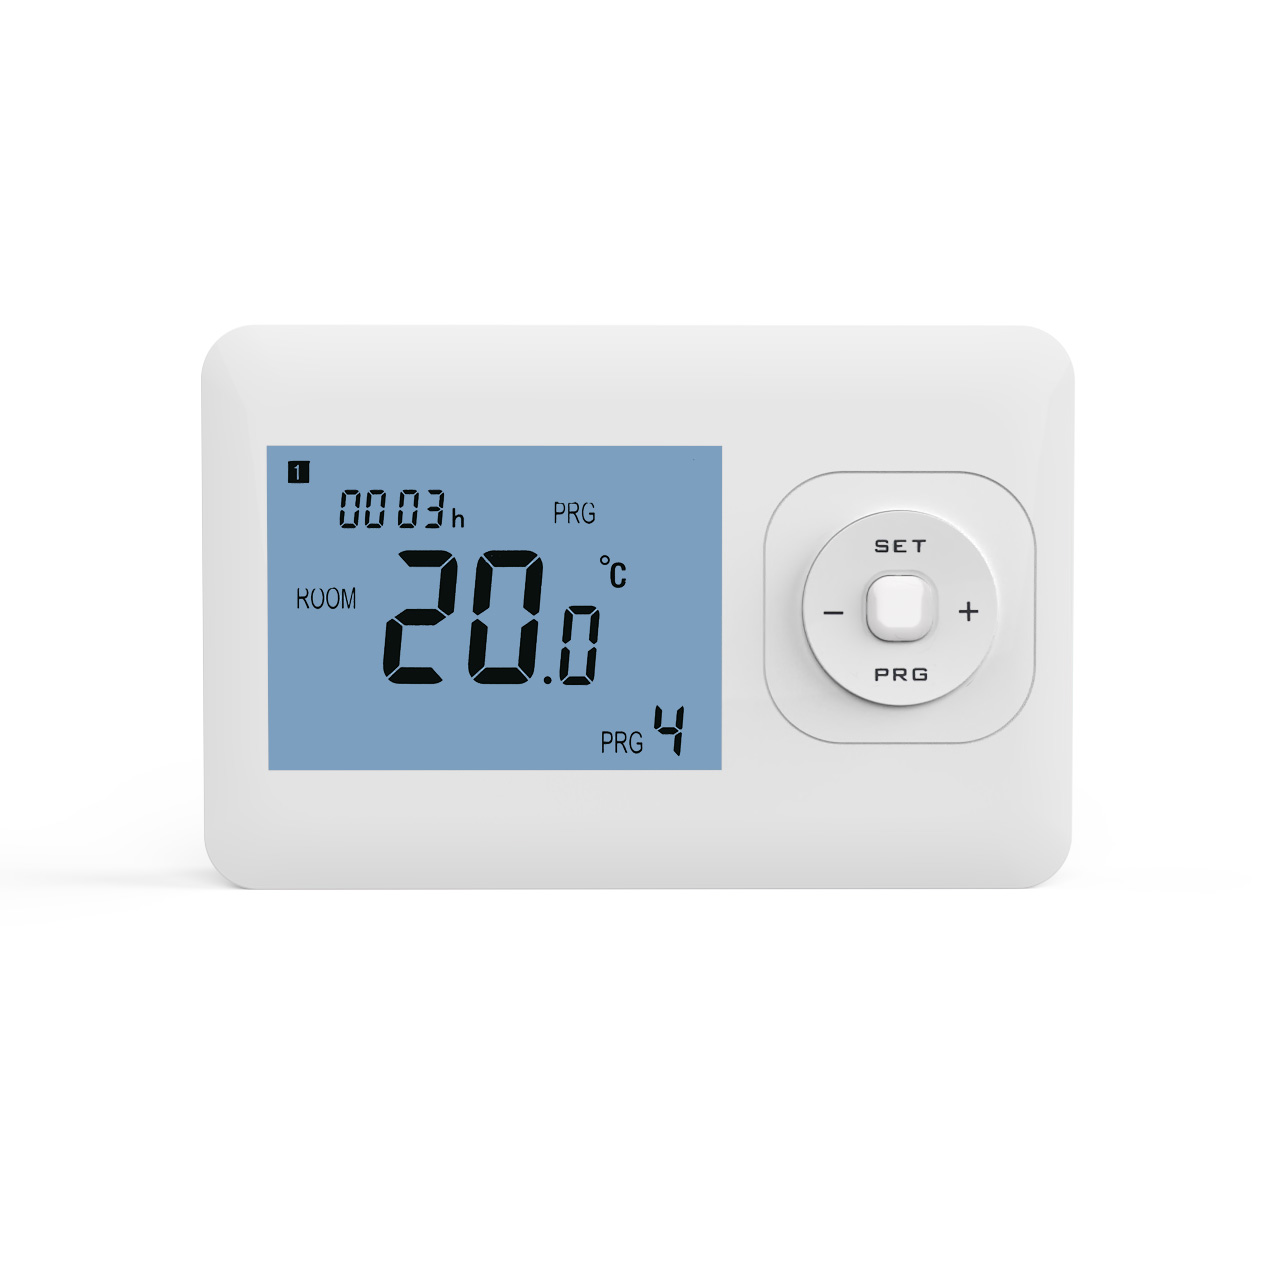 Opentherm wired room thermostat